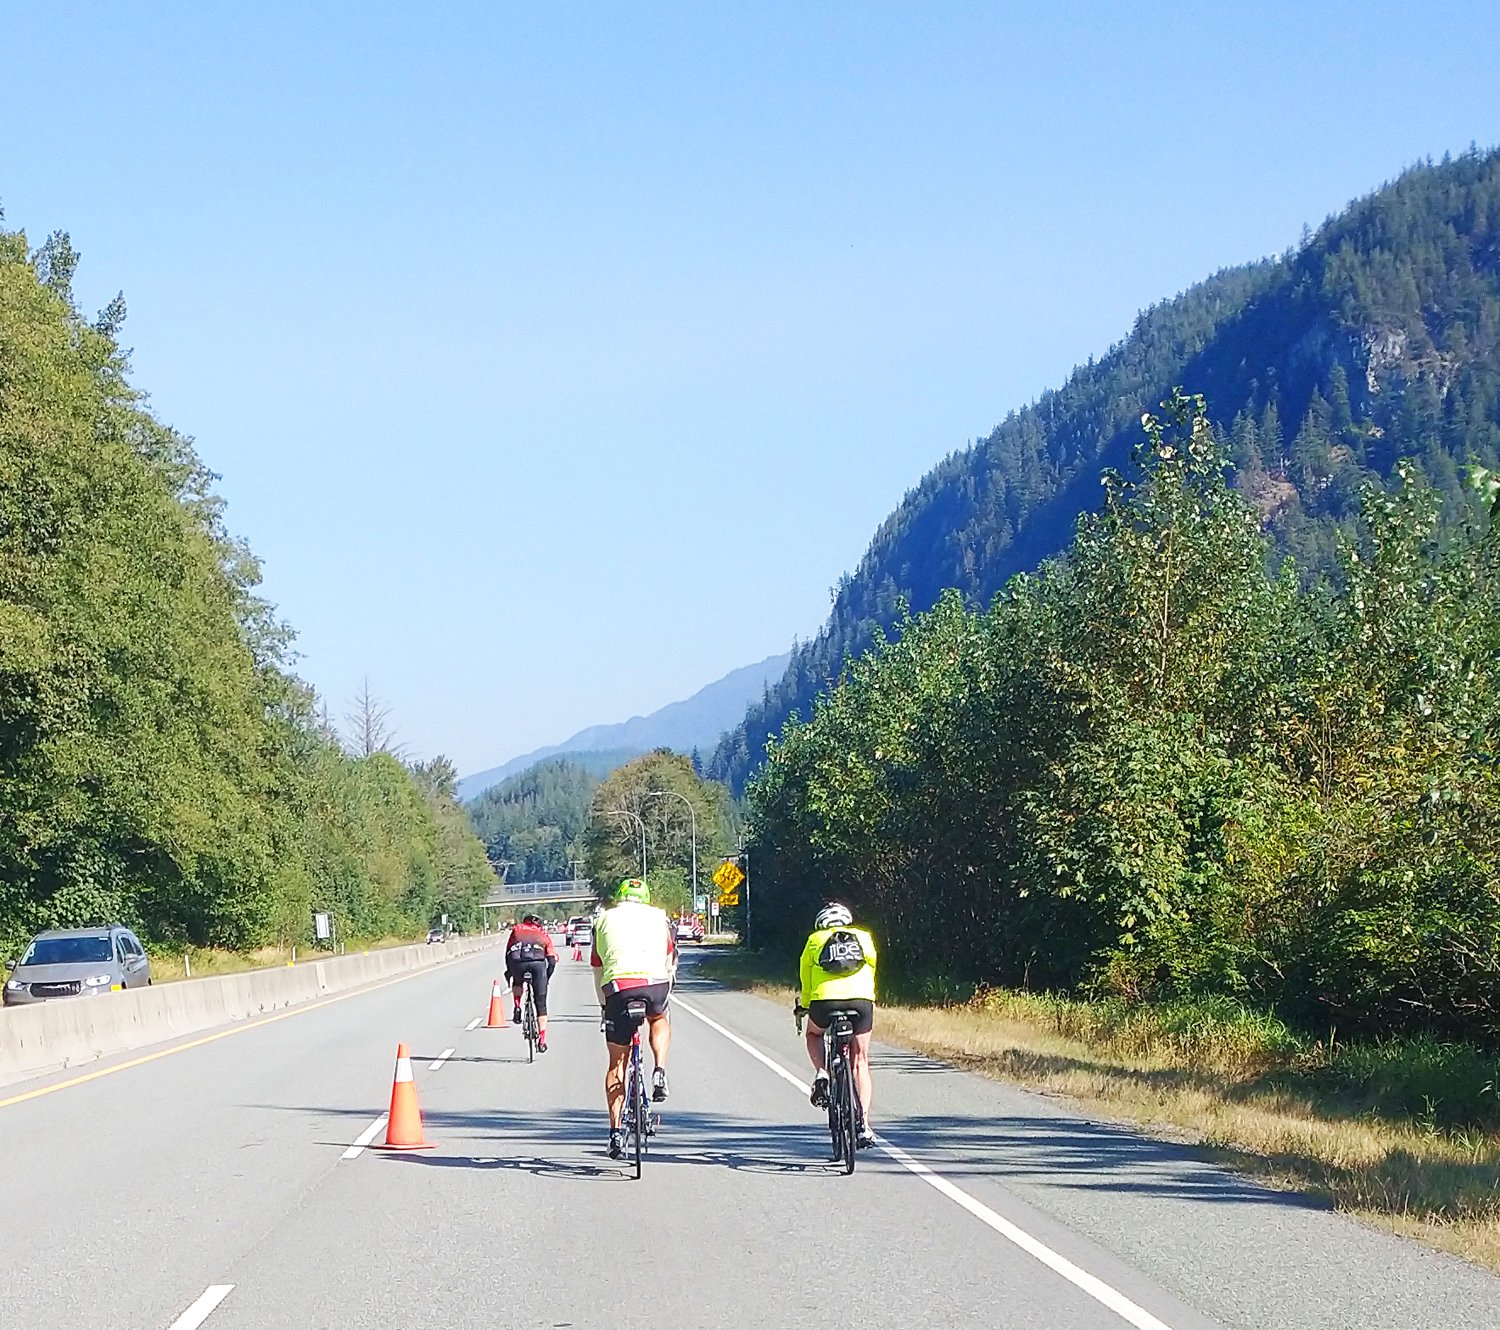 Apparently this was the day of the Vancouver-Whistler fondo. Damn, I would have done that as an out and back if I had known.